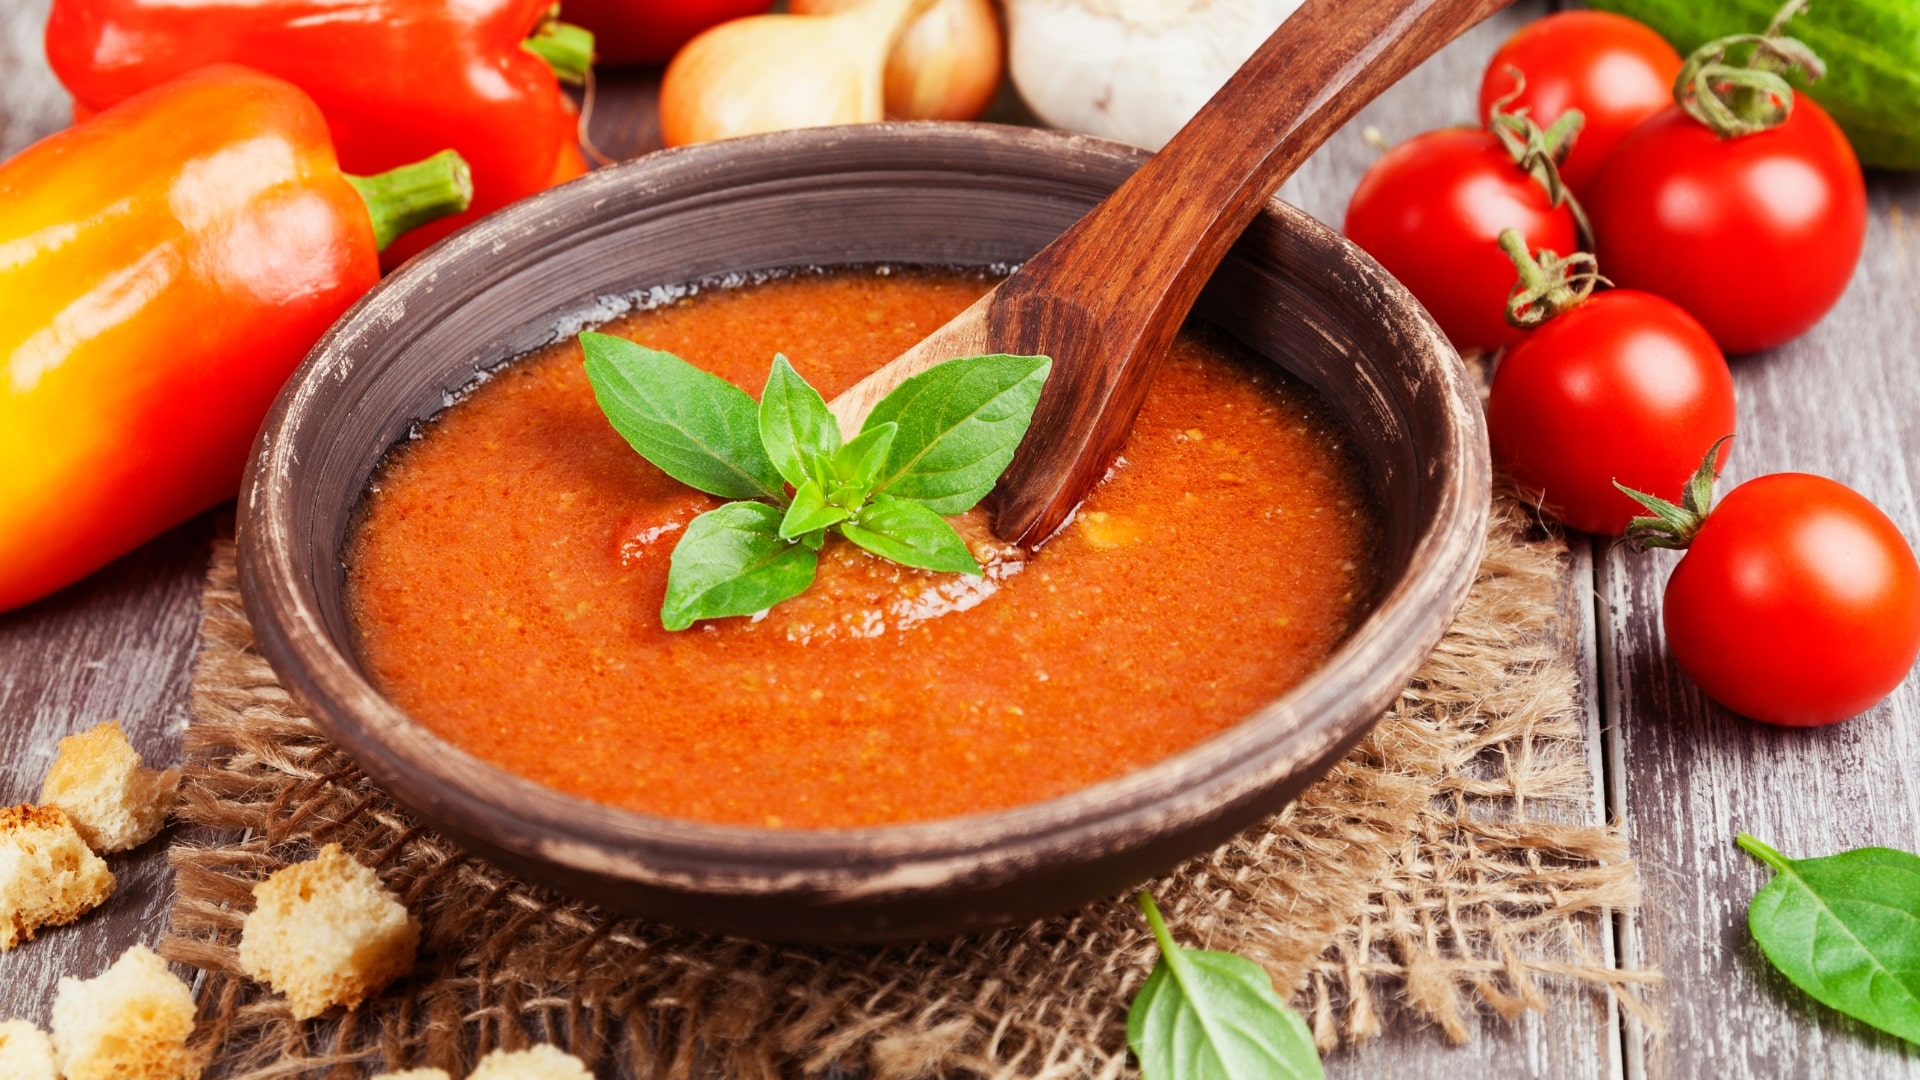 Brown ceramic bowl of reddish orange gazpacho soup with tomatoes and peppers surrounding.